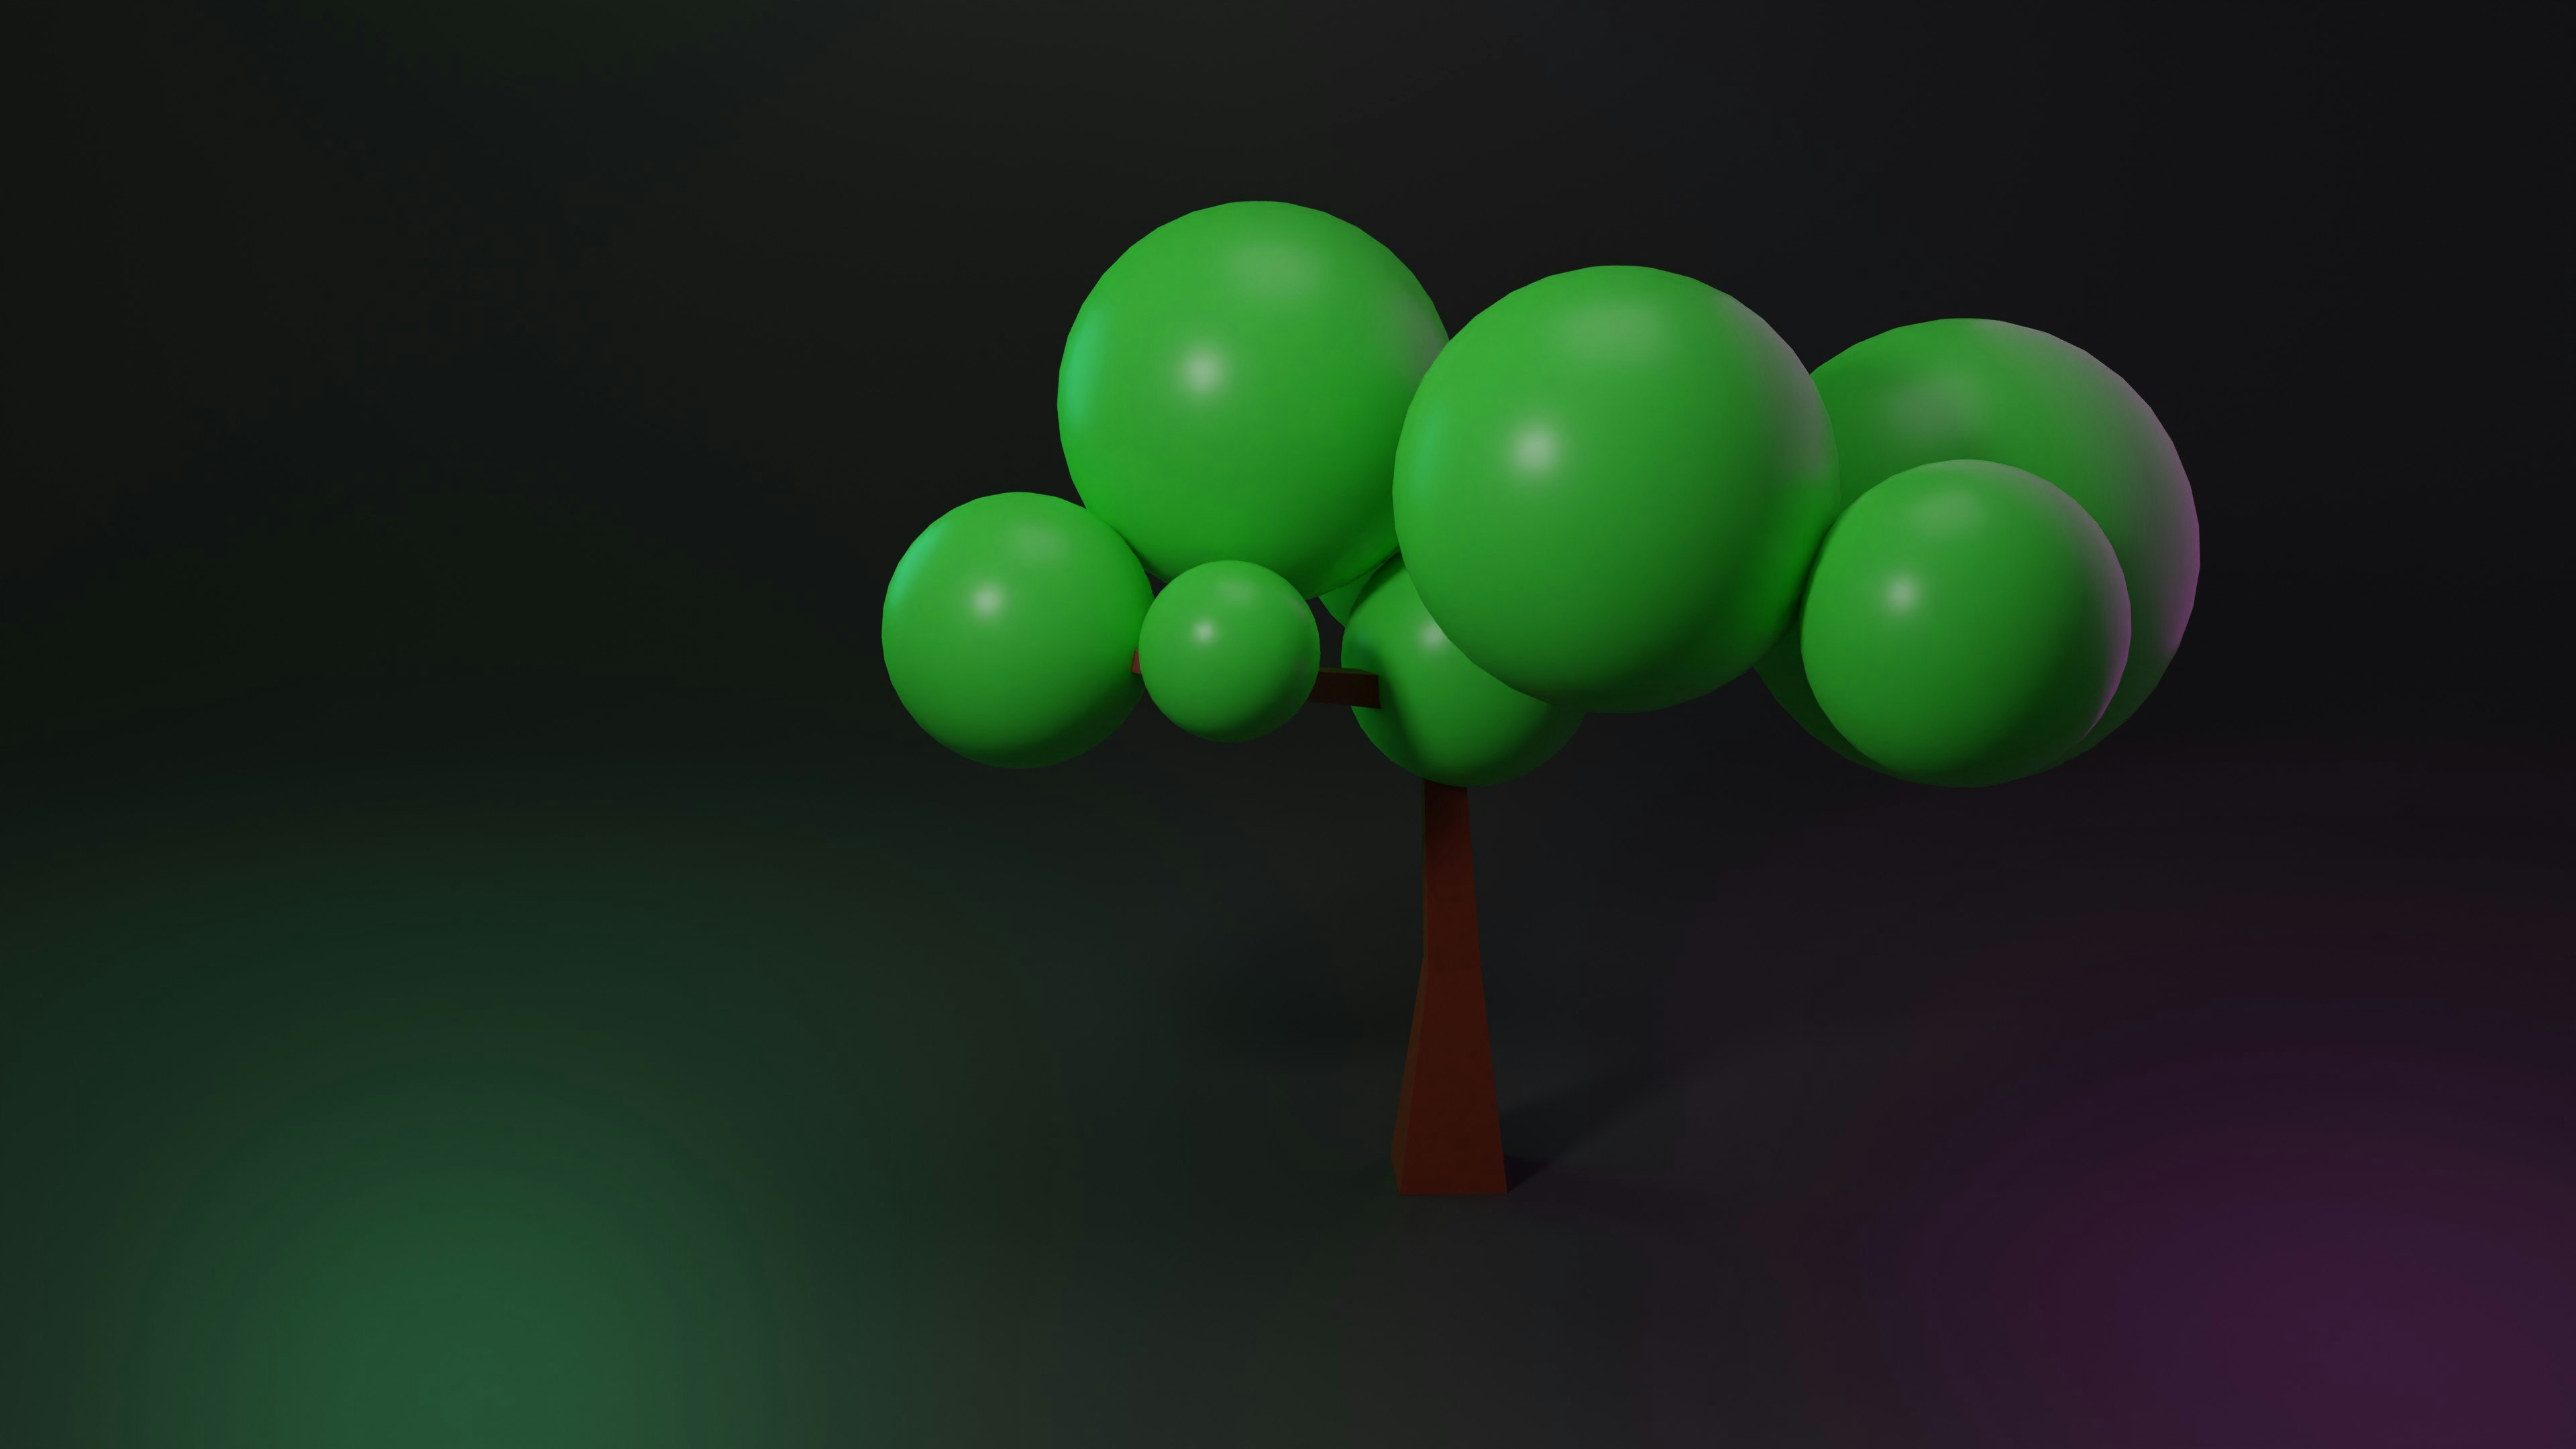 green and red balloons illustration